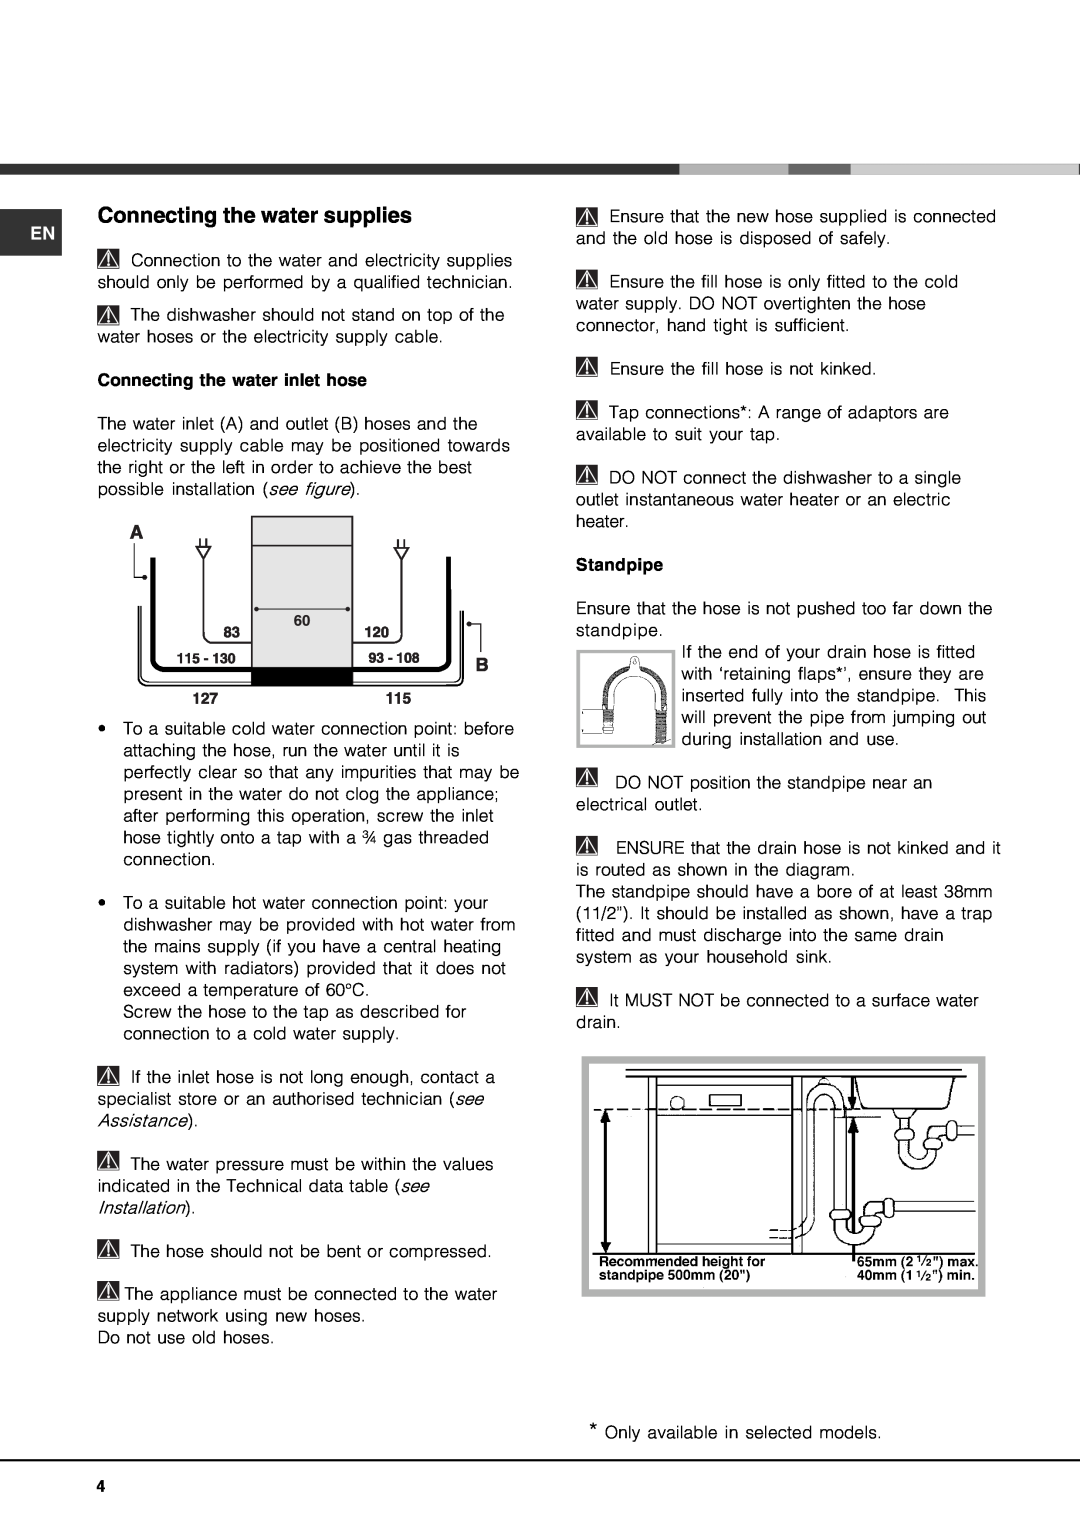 Hotpoint LFZ 338 A/HA IX manual Connecting the water supplies 